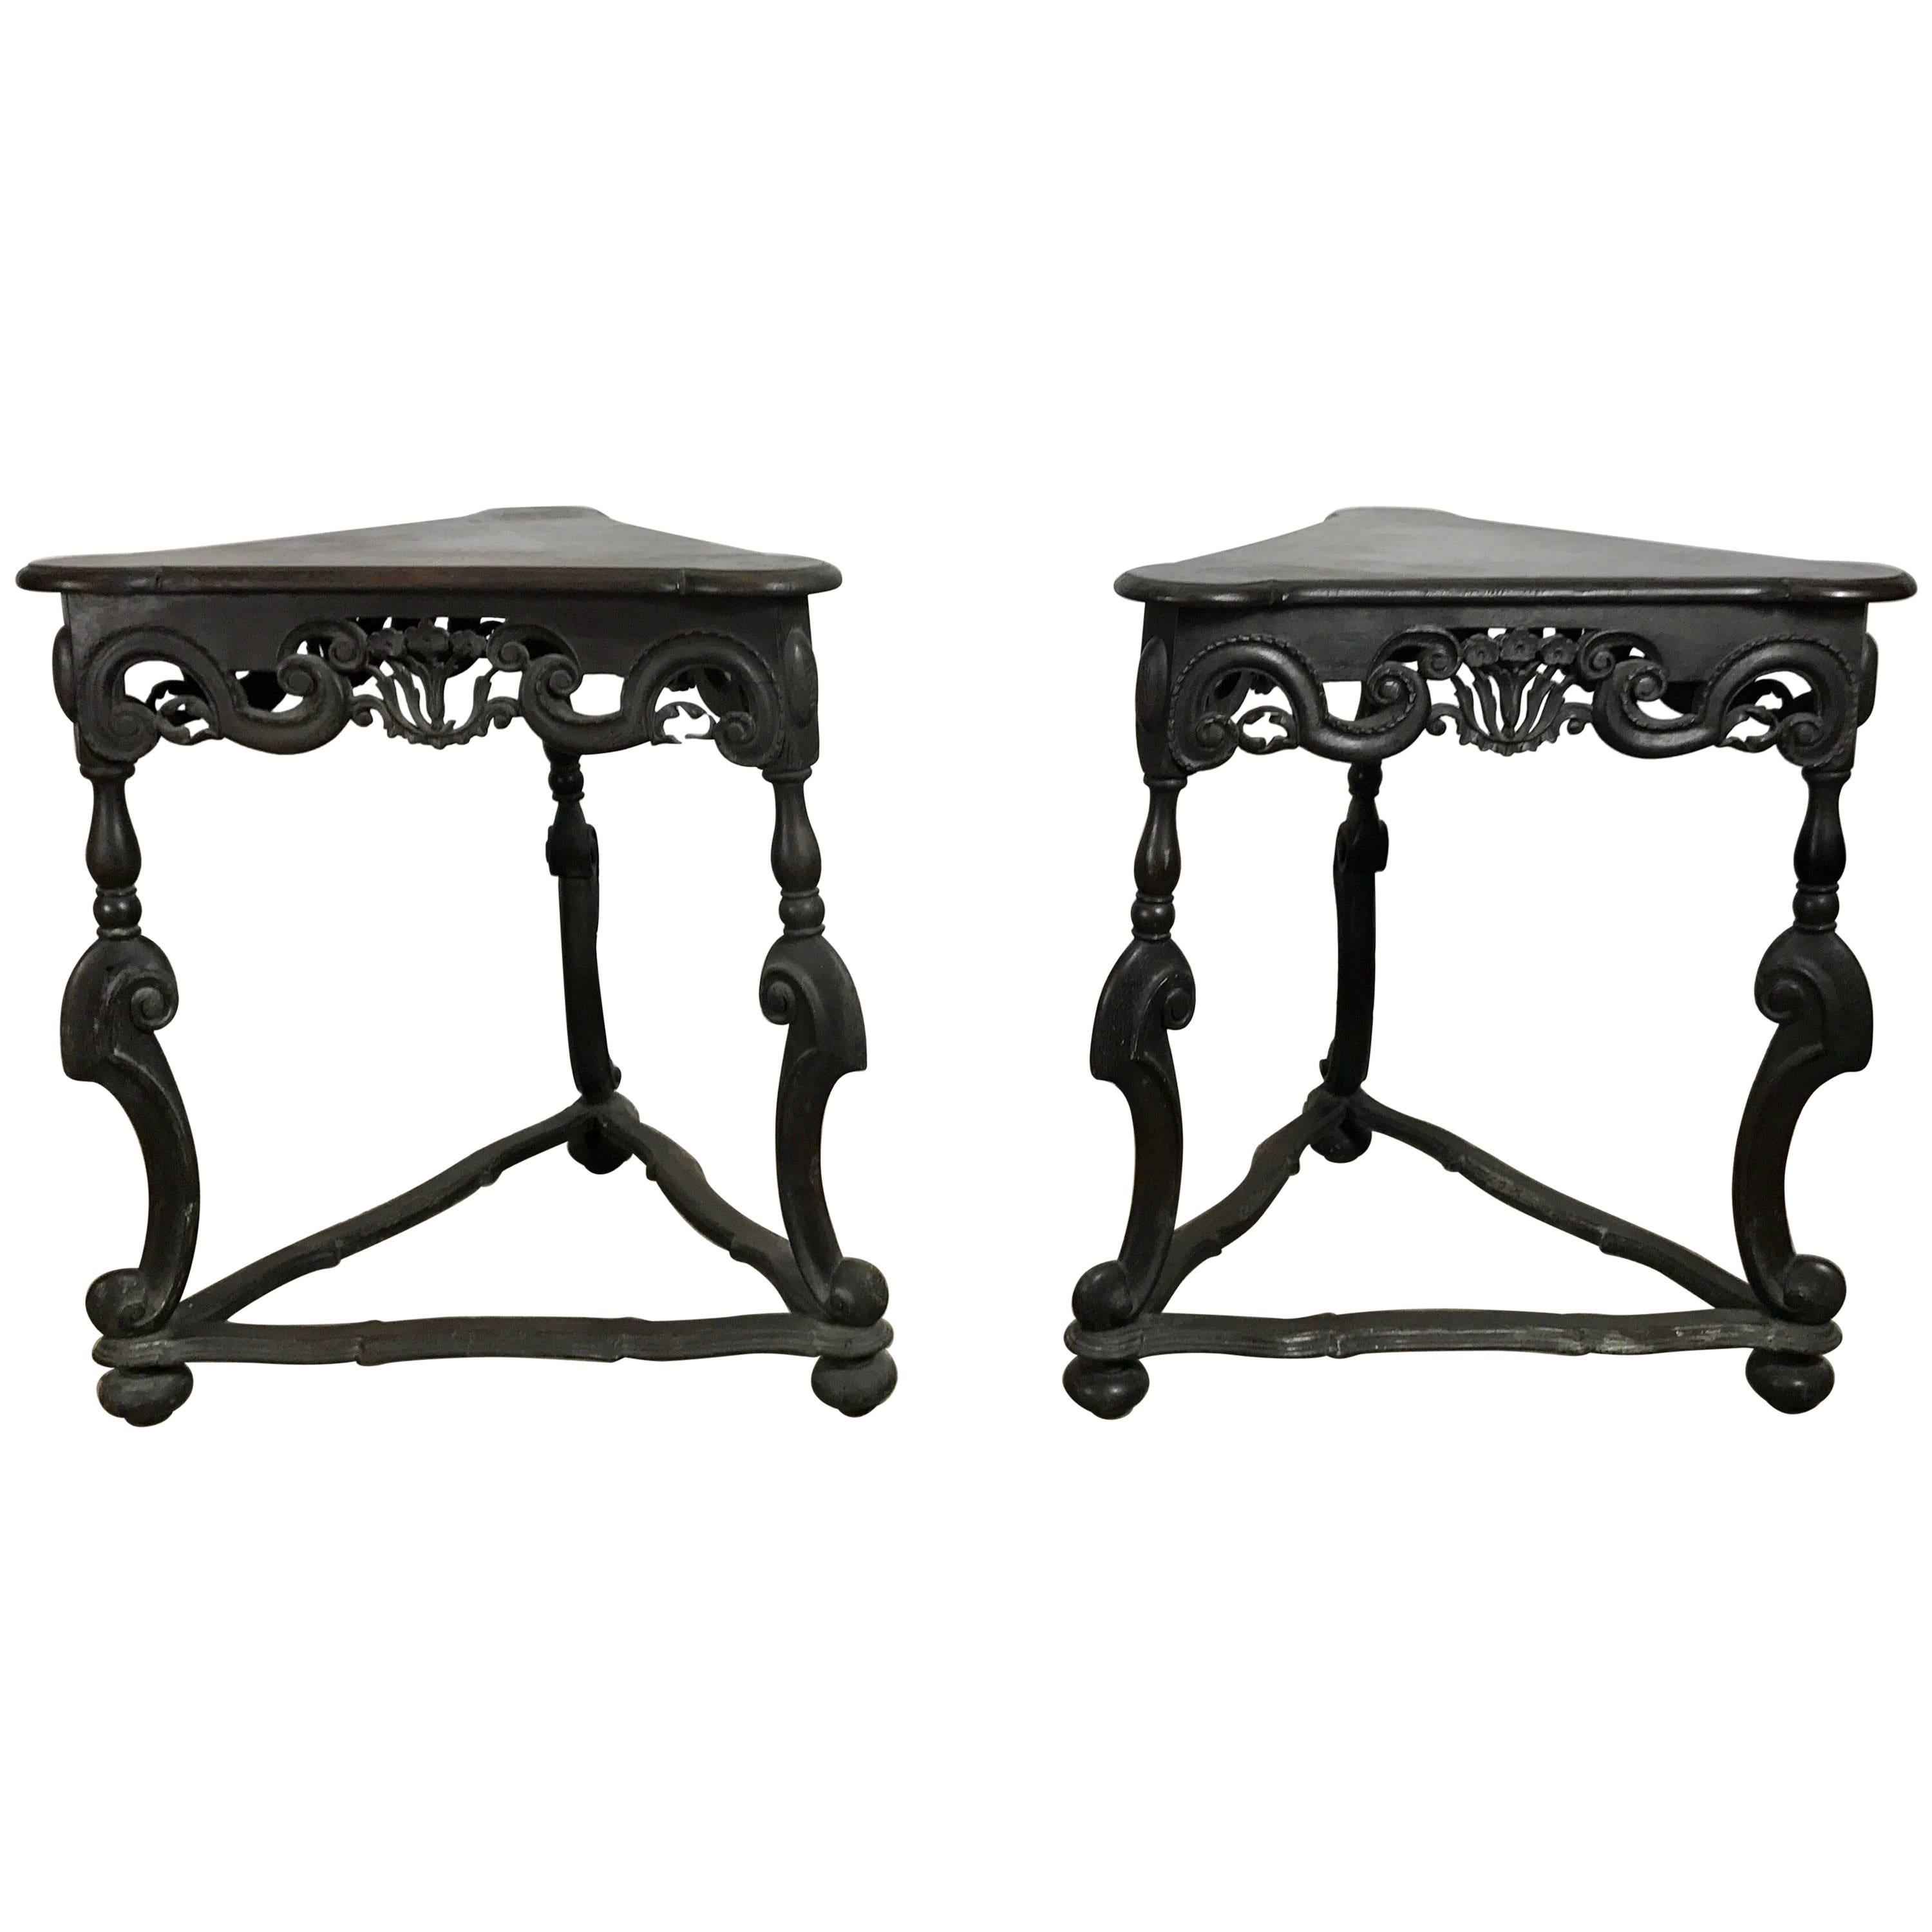 Pair of Rococo Style Triangular Carved Walnut Tables